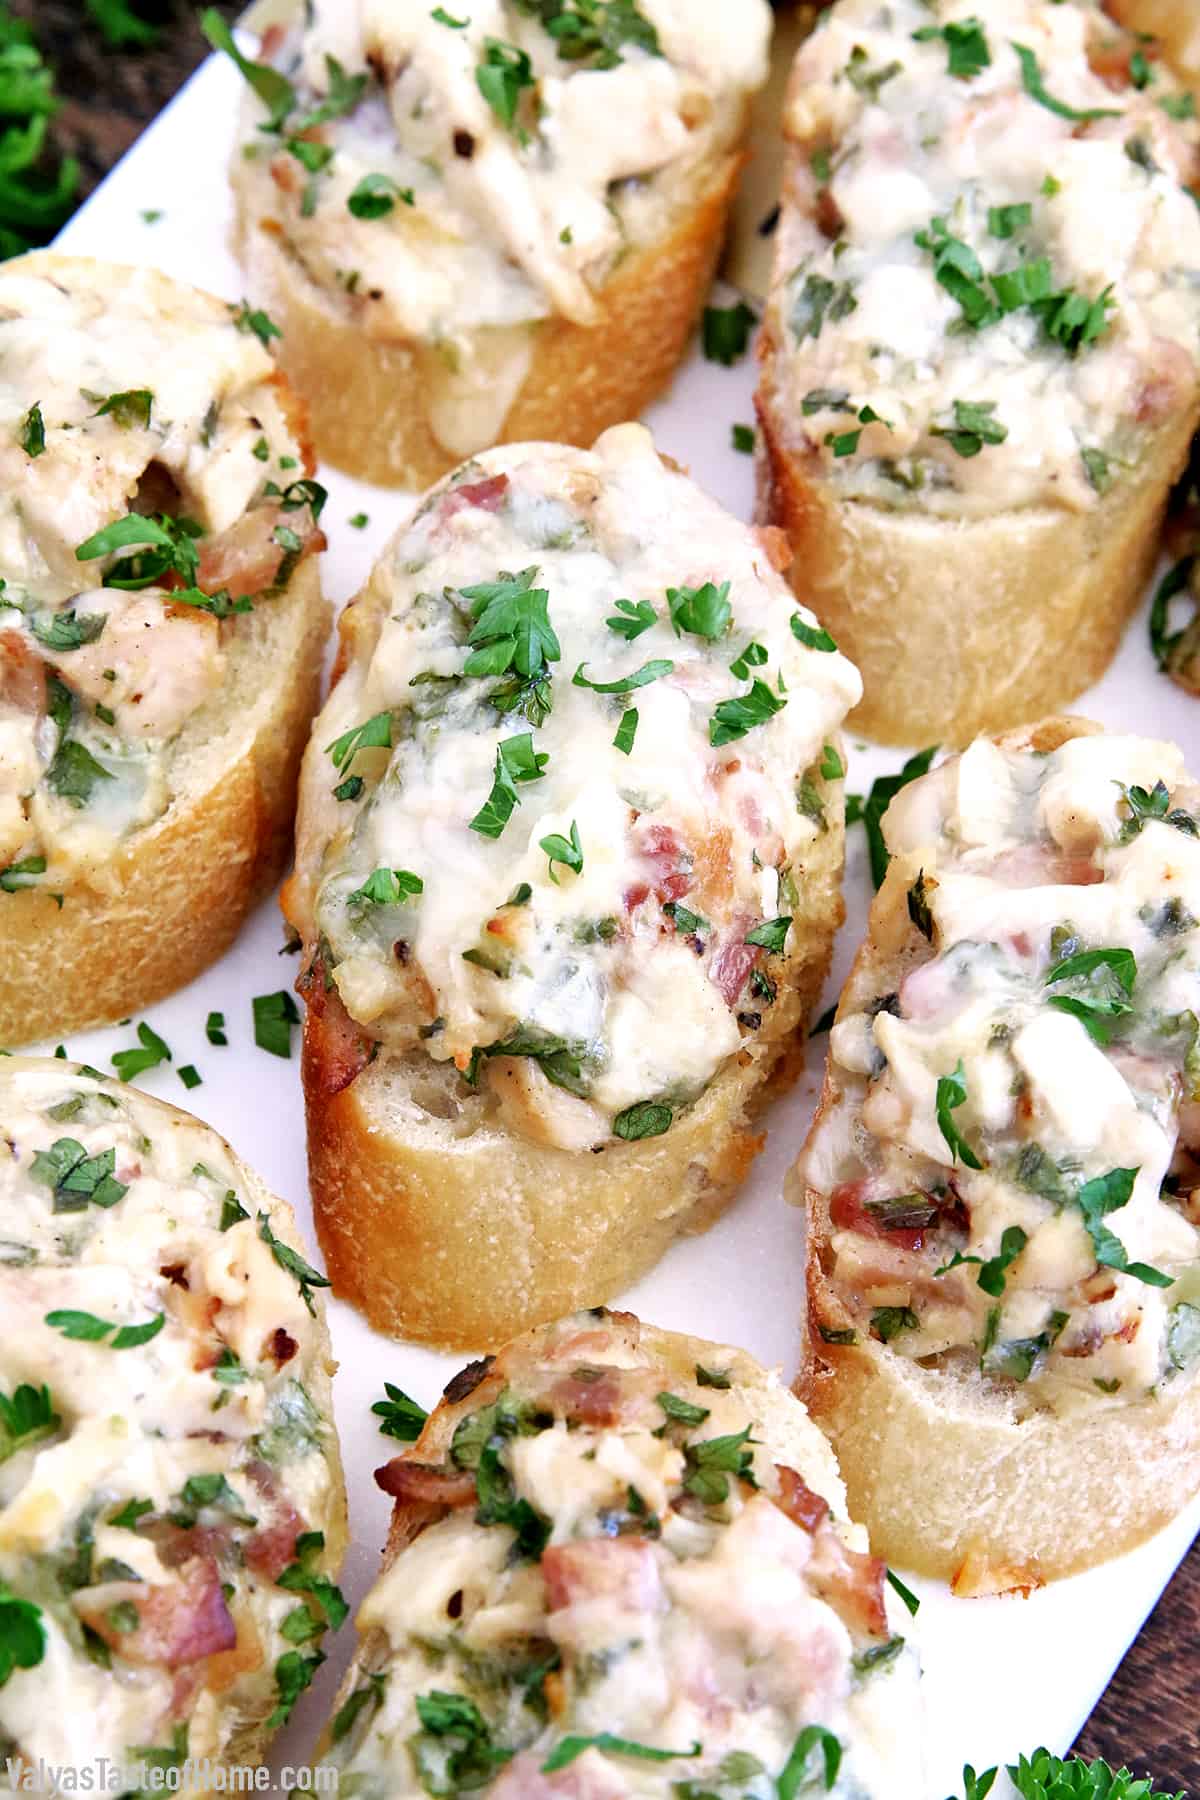 These Chicken Bacon Alfredo Canapés Appetizers are absolutely delicious served warm. These appetizers are so hearty and filling it also eats like a meal. You may turn it into a fantastic meal by adding a good homemade Caesar salad for an easy, light, and perfect lunch.